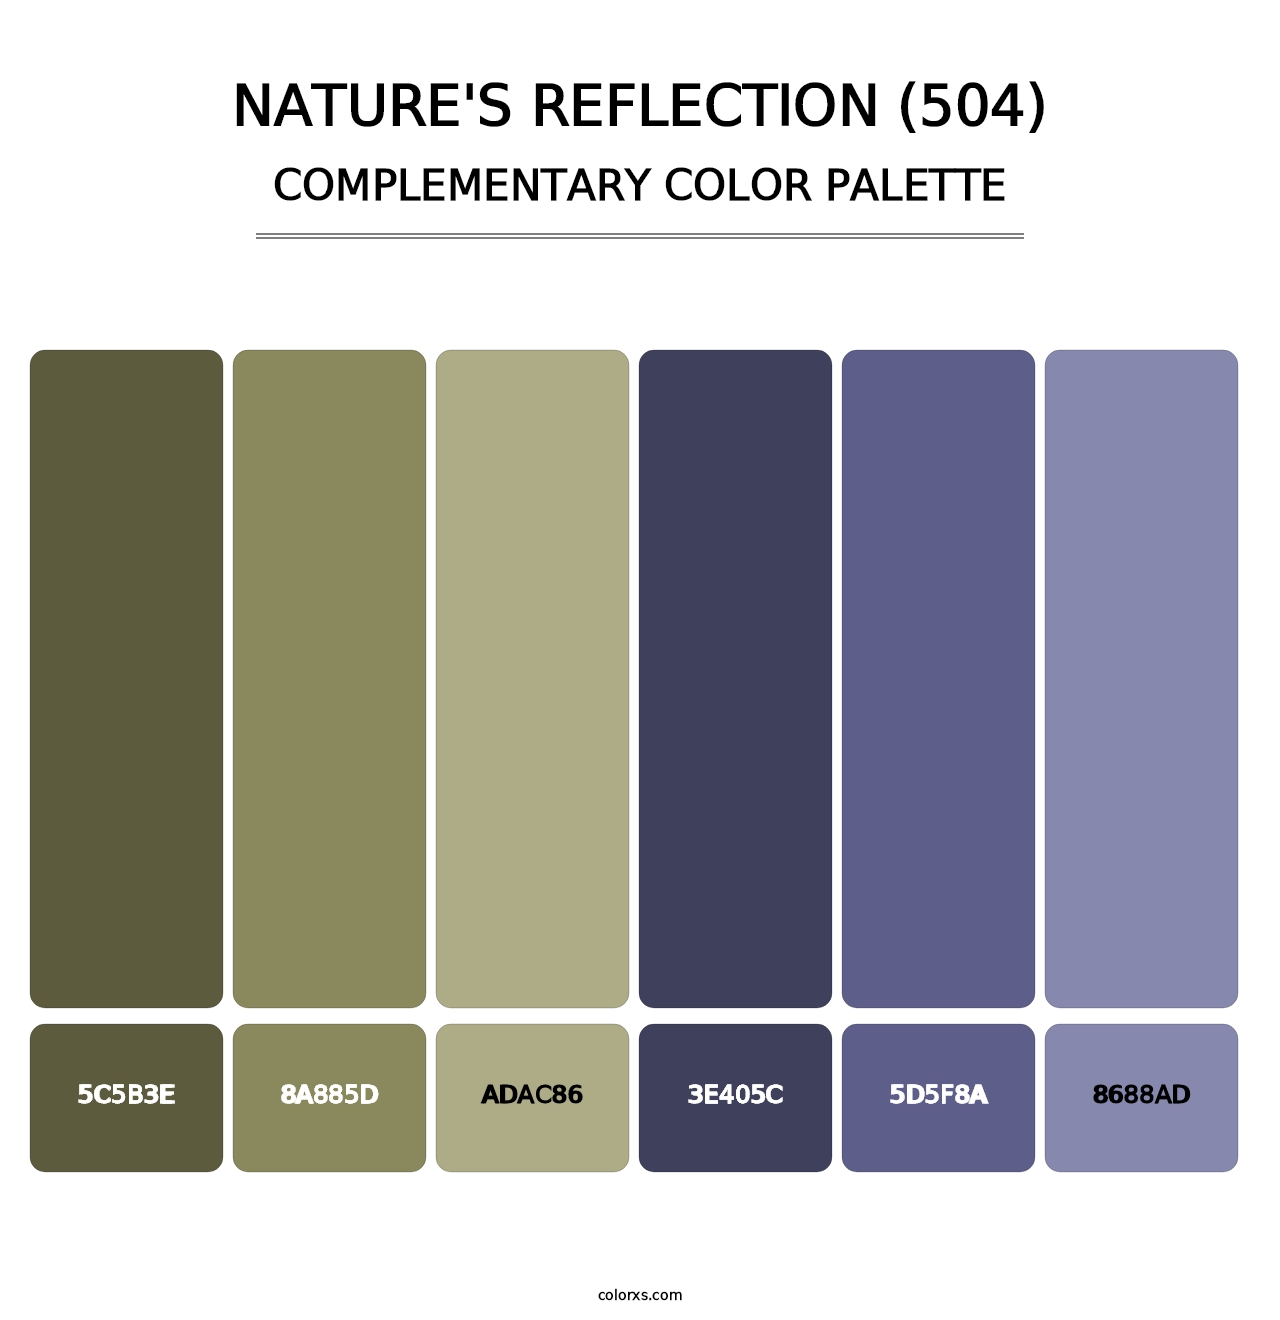 Nature's Reflection (504) - Complementary Color Palette